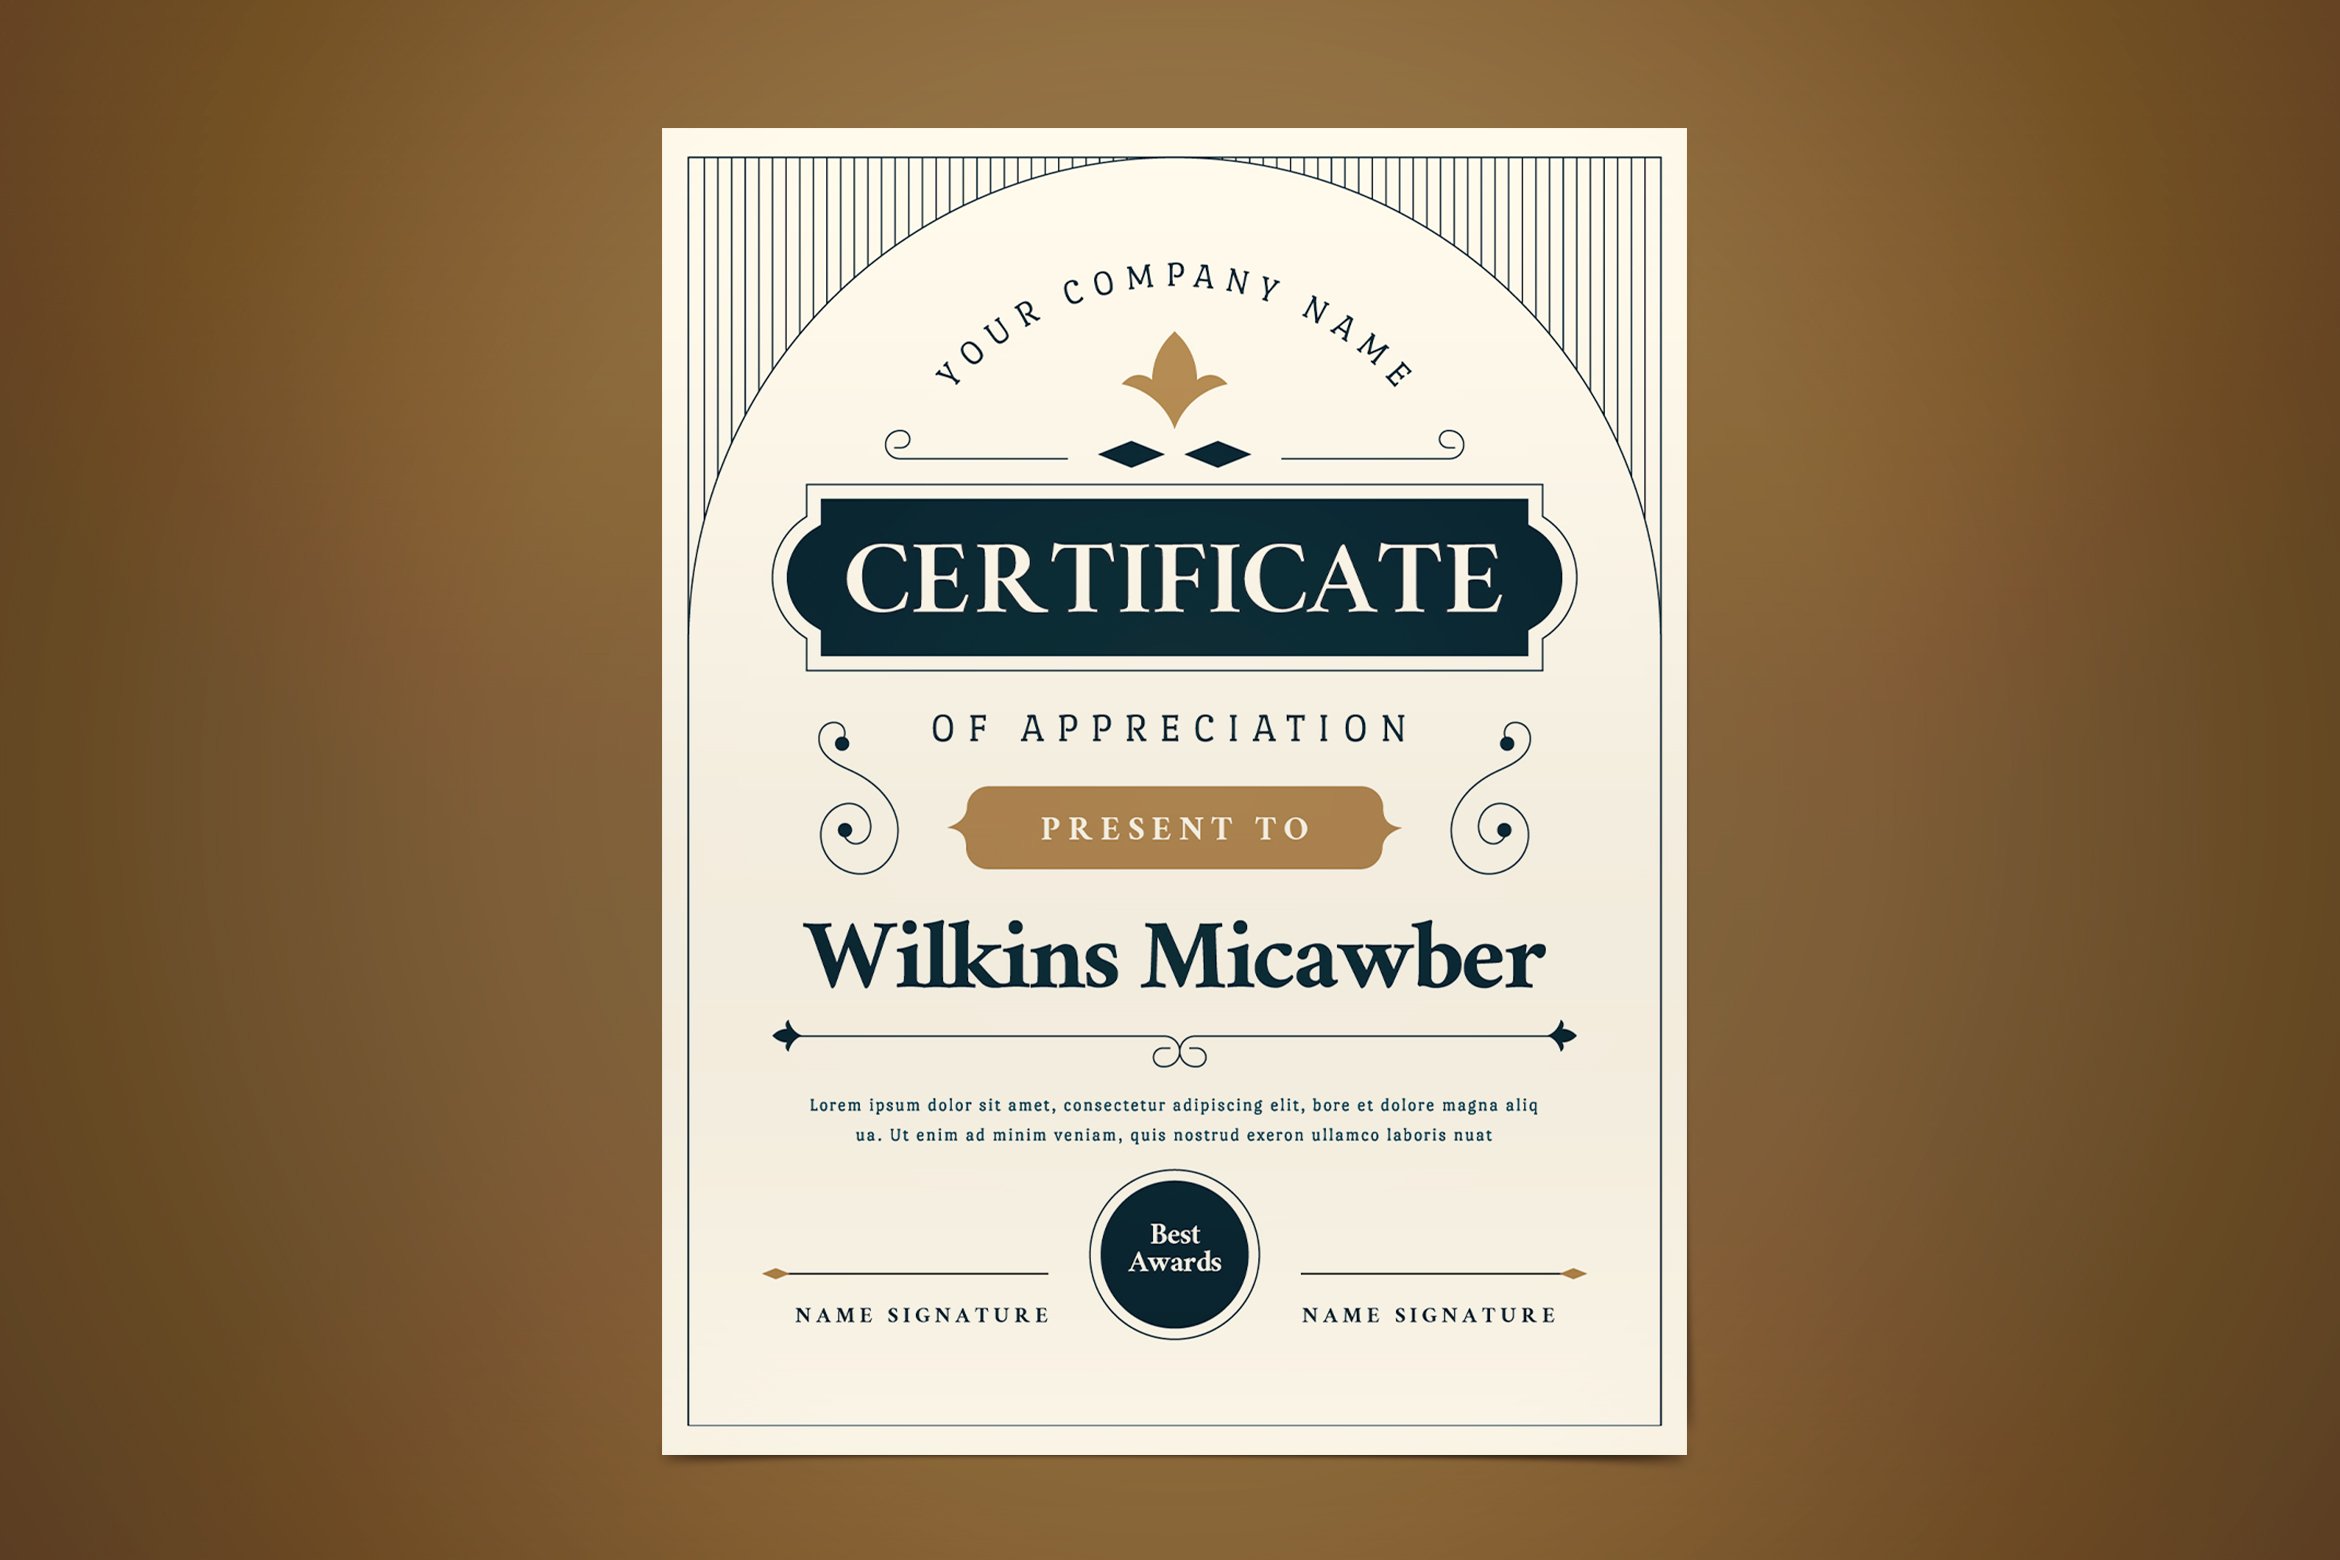 Vintage Certificate preview image.